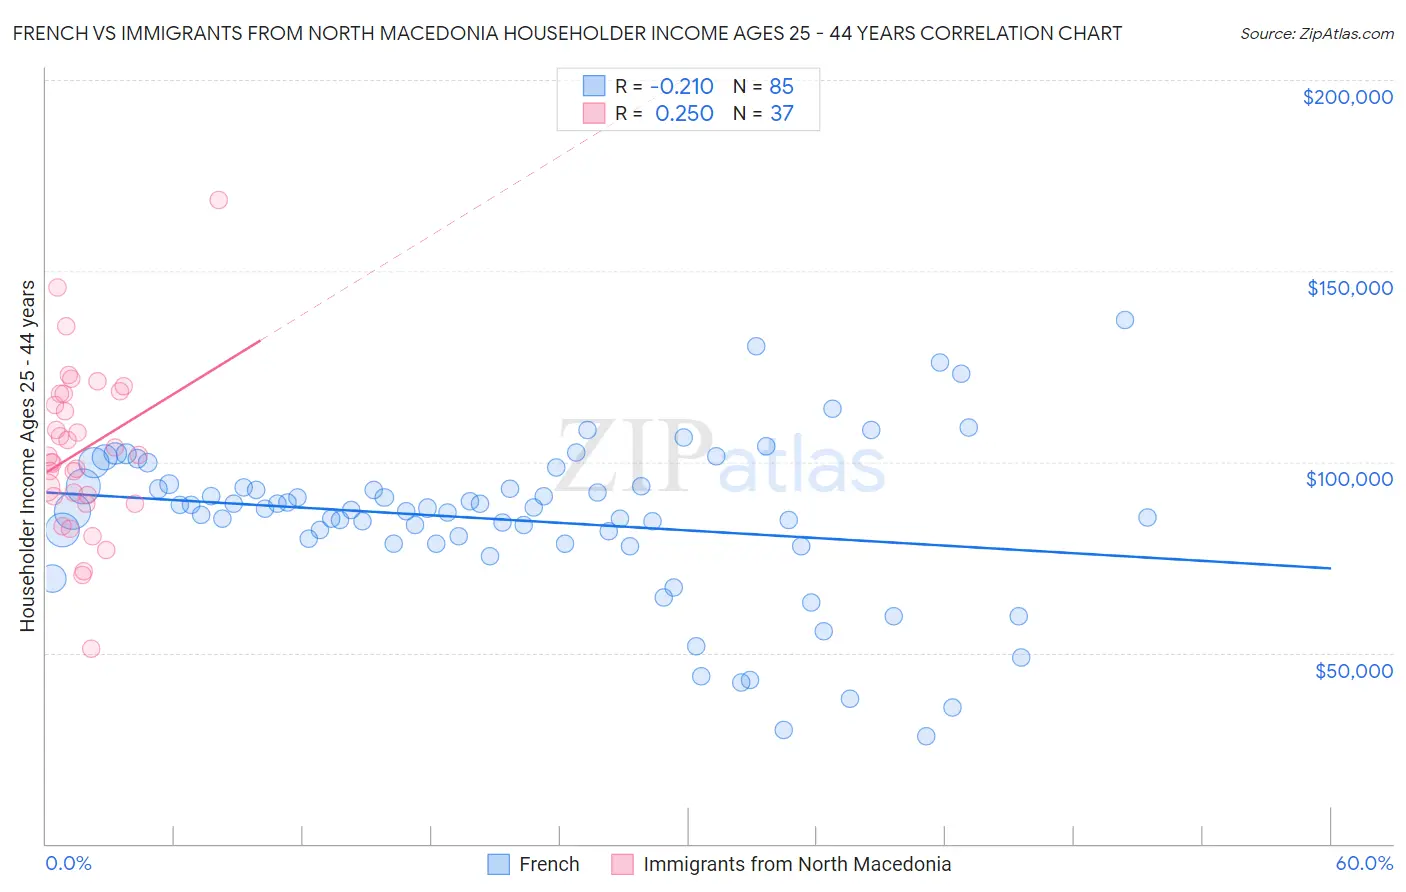 French vs Immigrants from North Macedonia Householder Income Ages 25 - 44 years